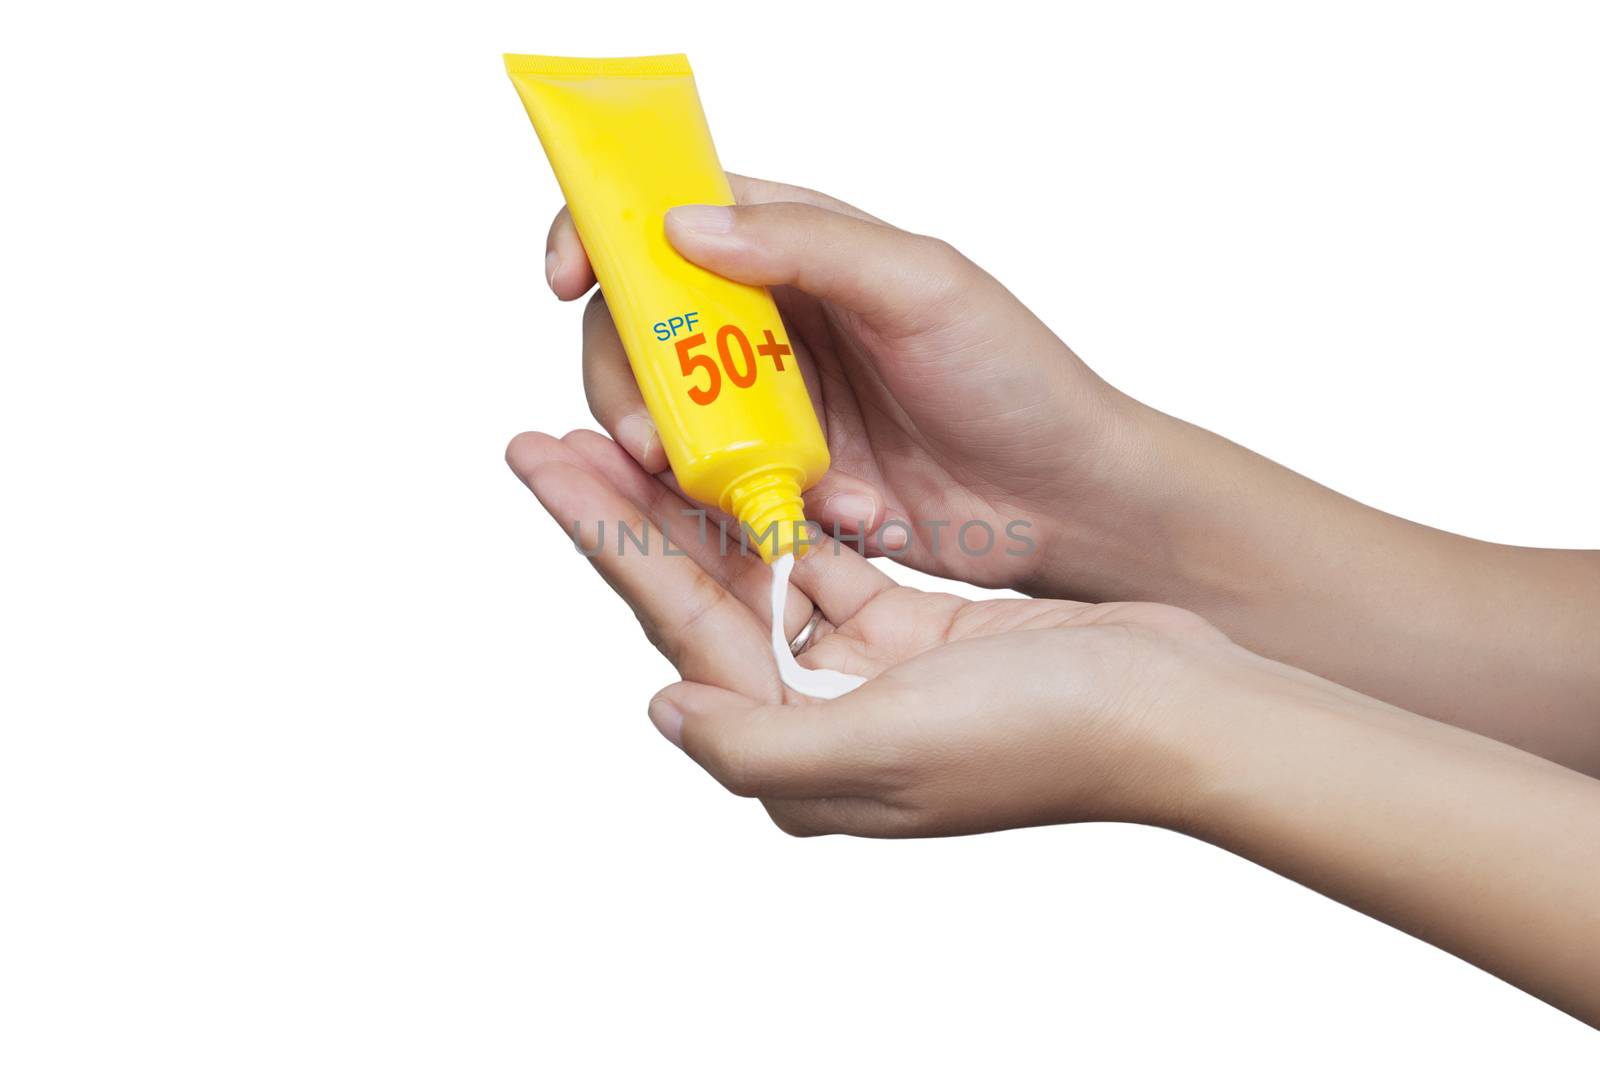 woman applying sunscreen on her hand isolate on white background with clipping path. SPF 50 and PA sunblock protection concept. Travel vacation